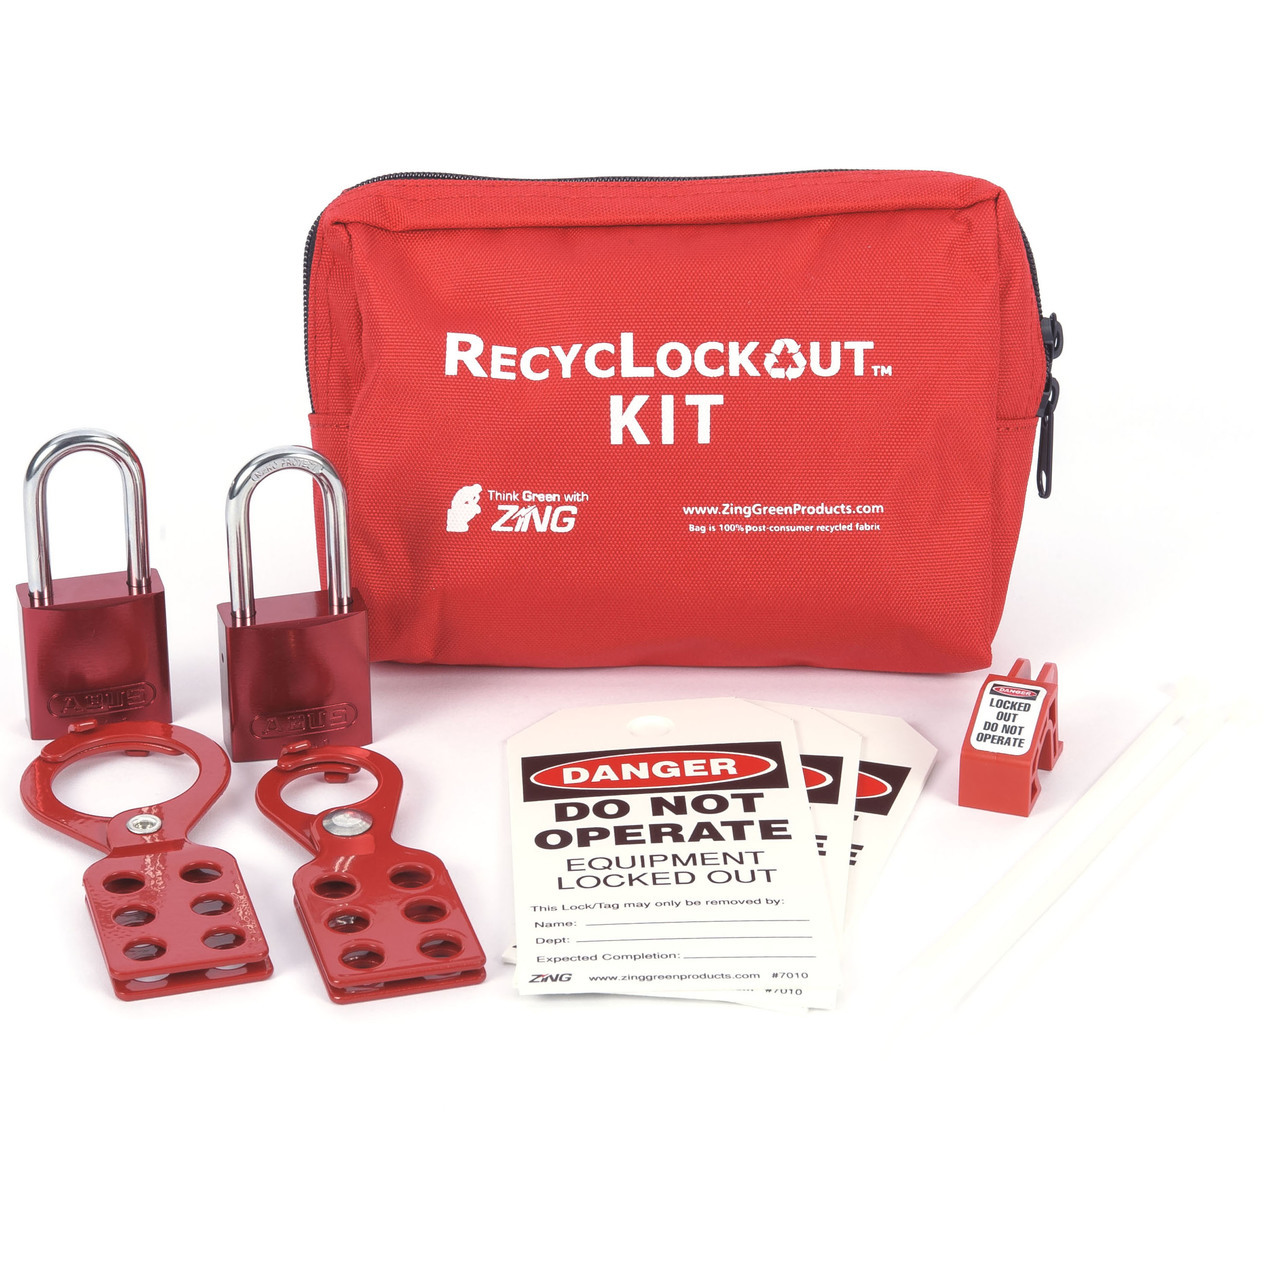 ZING RecycLockout Lockout Tagout Kit with Aluminum Padlocks, 11 Component, General Application